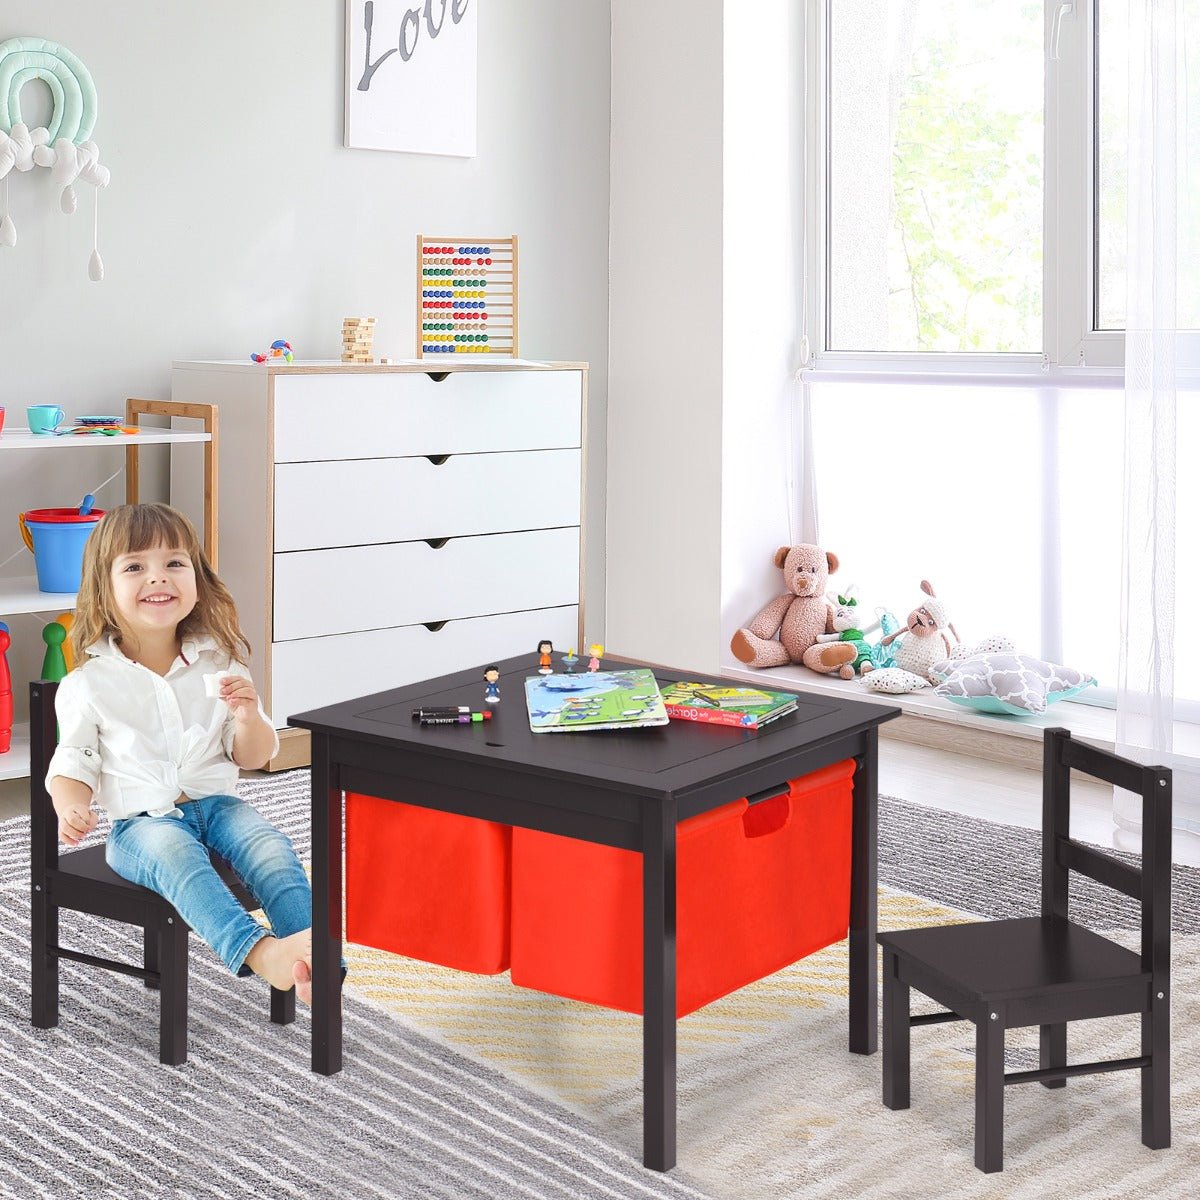 Kids Table with Clever Storage